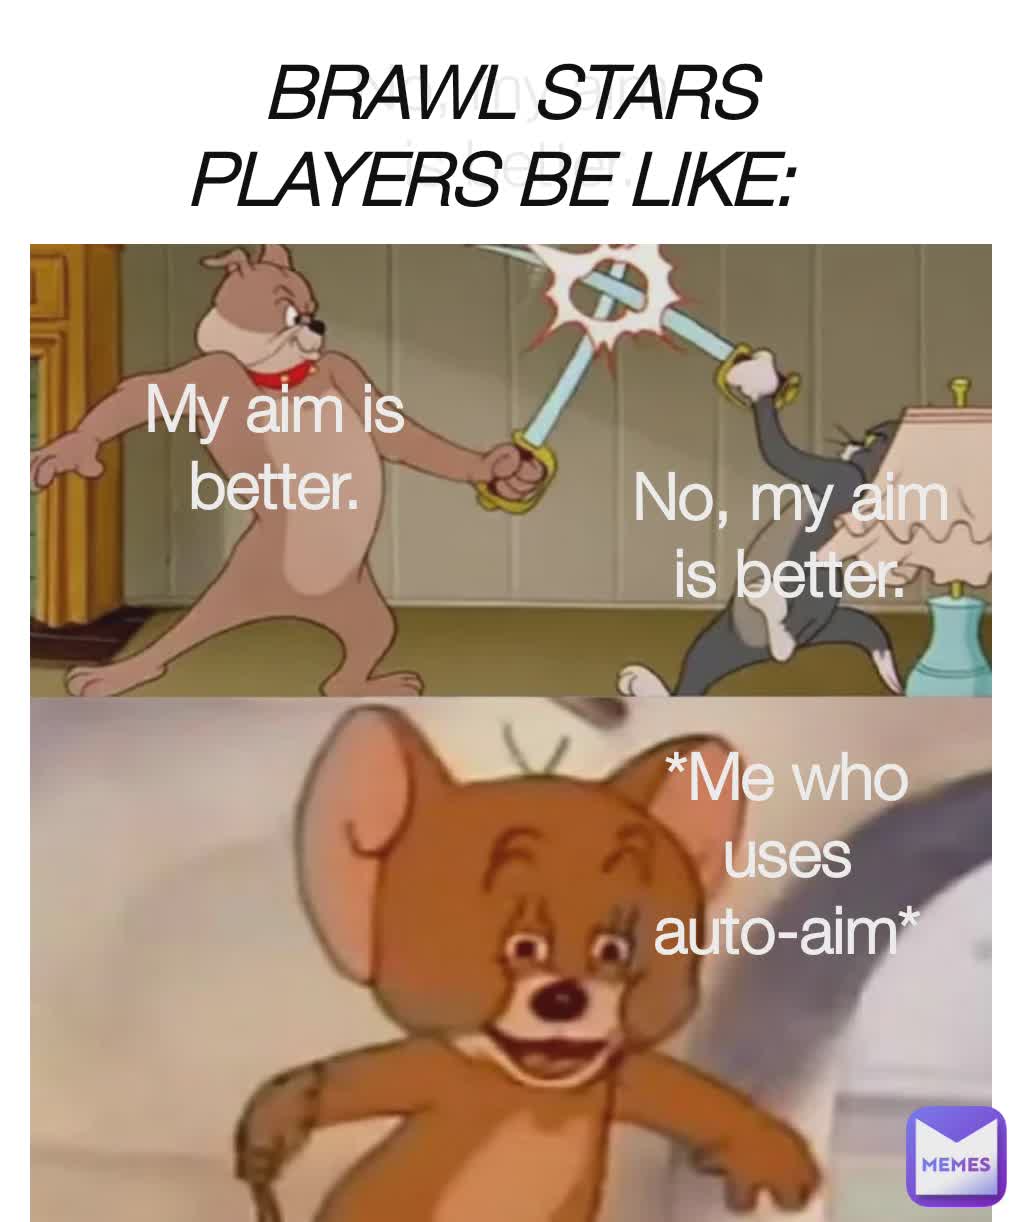 No, my aim
 is better. *Me who uses auto-aim* BRAWL STARS PLAYERS BE LIKE: My aim is better. No, my aim is better.